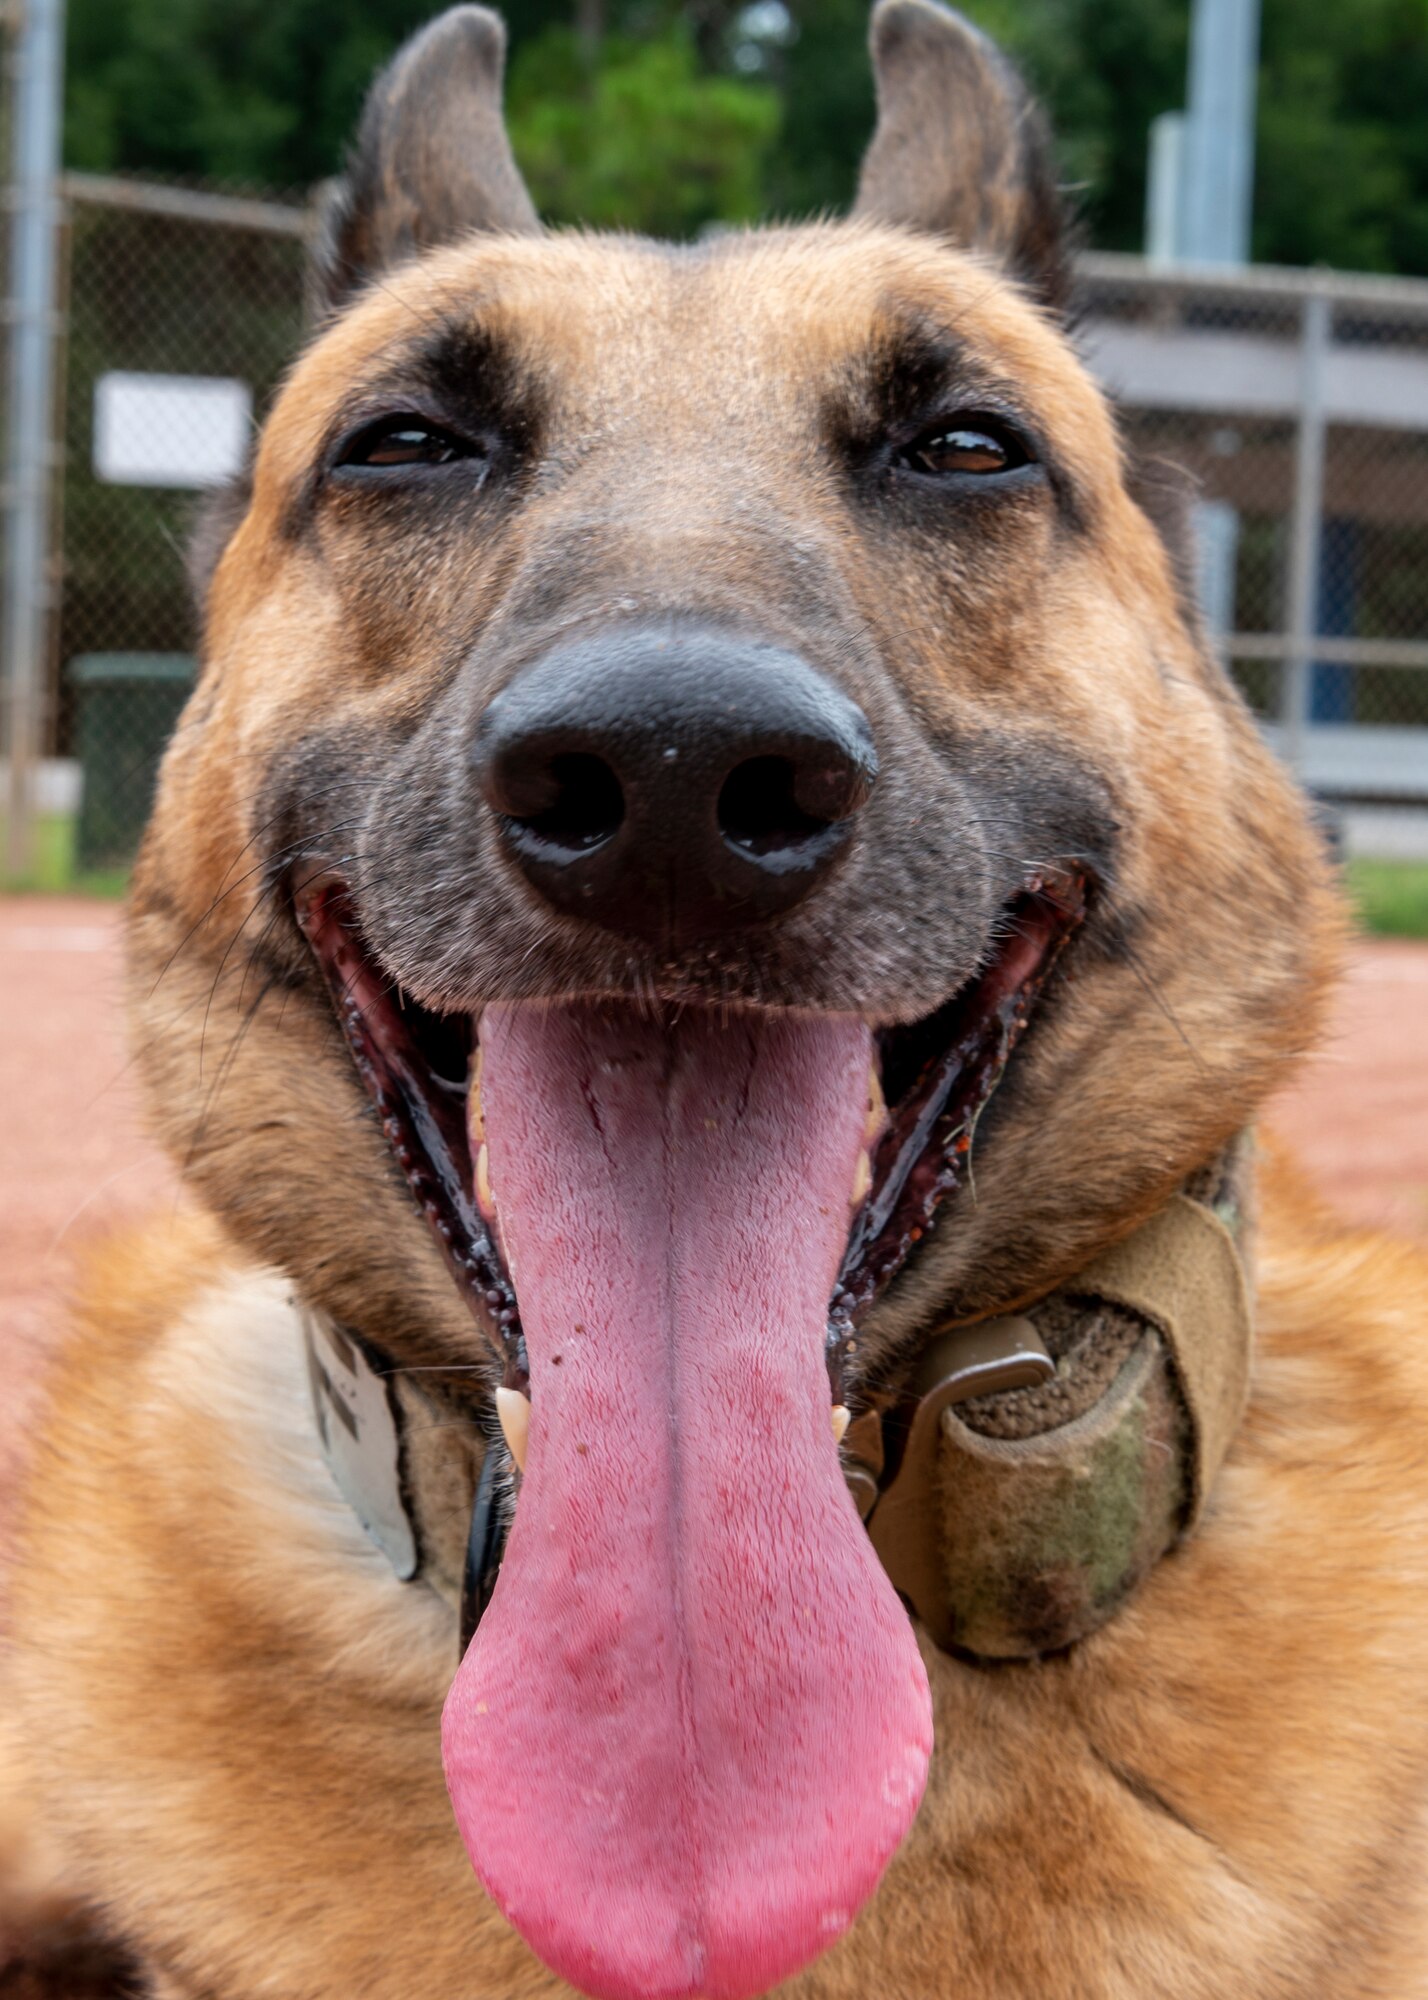 Ronny, a retired 1st Special Operations Security Forces Squadron Military Working Dog, poses for the camera after performing center lines and transfer drills Aug. 23, 2022, at Hurlburt Field, Florida. Throughout his distinguished career, Ronny was a key part of 30 successful missions to include direct support to United States President Joe Biden, as well as former U.S. President Donald Trump, former U.S. Vice President Mike Pence and a number of Department of State officials, among others. Additionally, Ronny deployed to Eskan Village, Saudi Arabia.